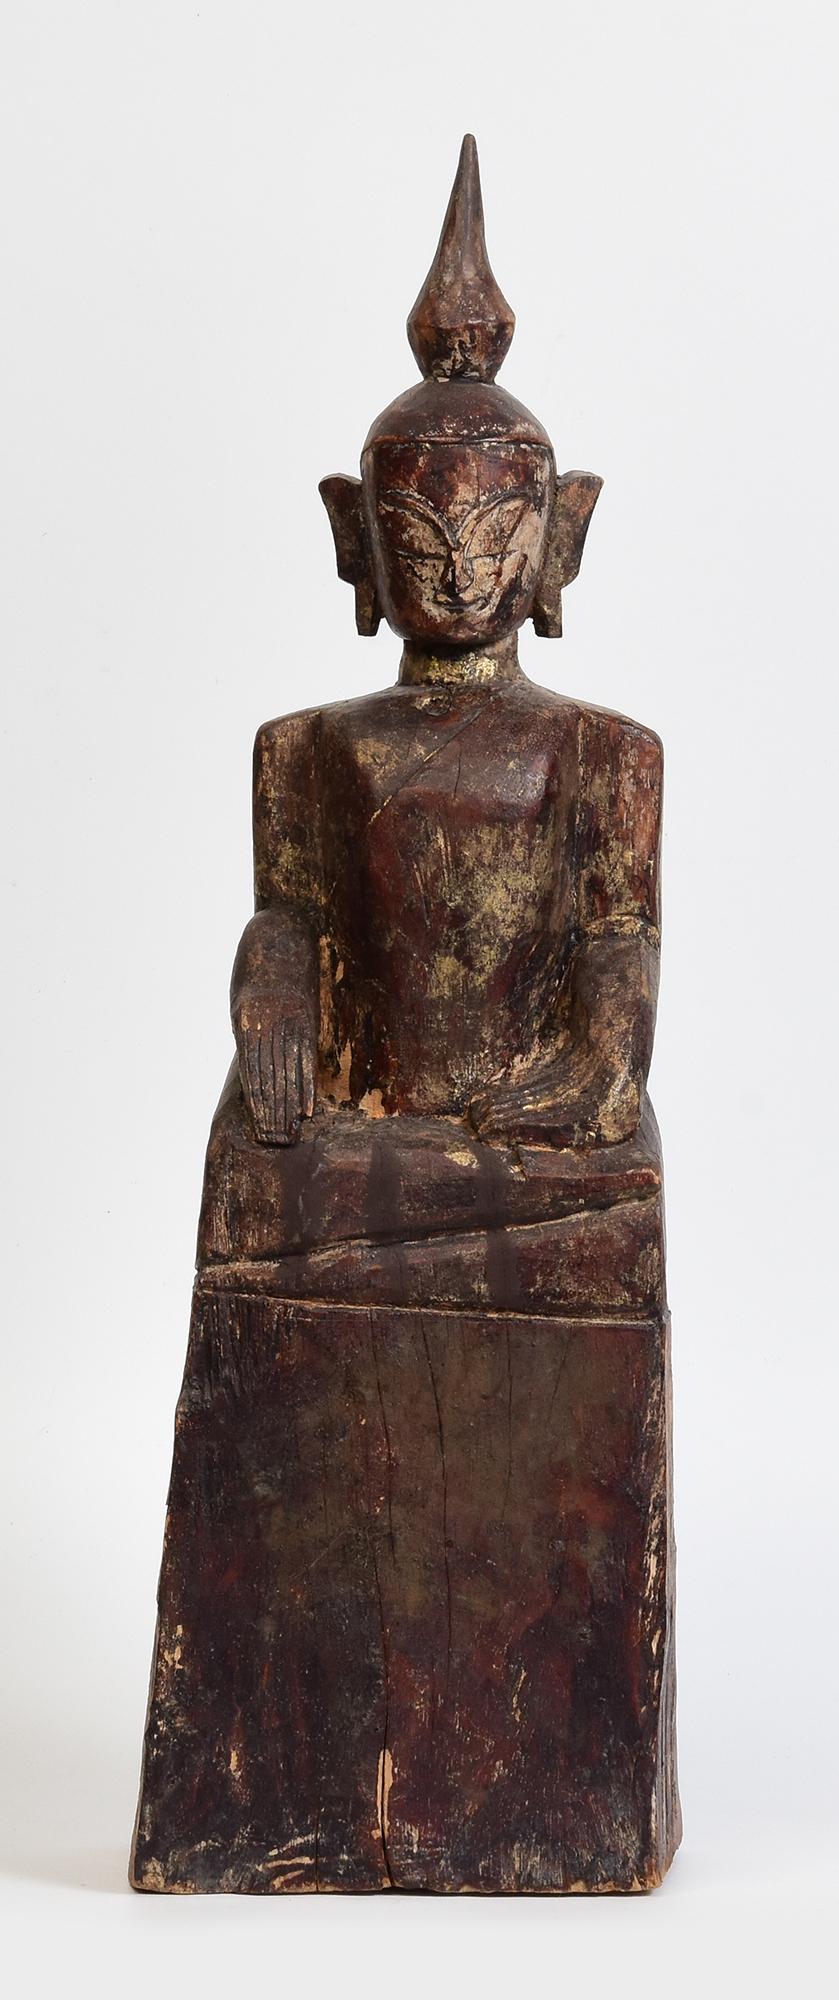 18th Century, Shan, Antique Tai Lue Burmese Wooden Seated Buddha For Sale 7